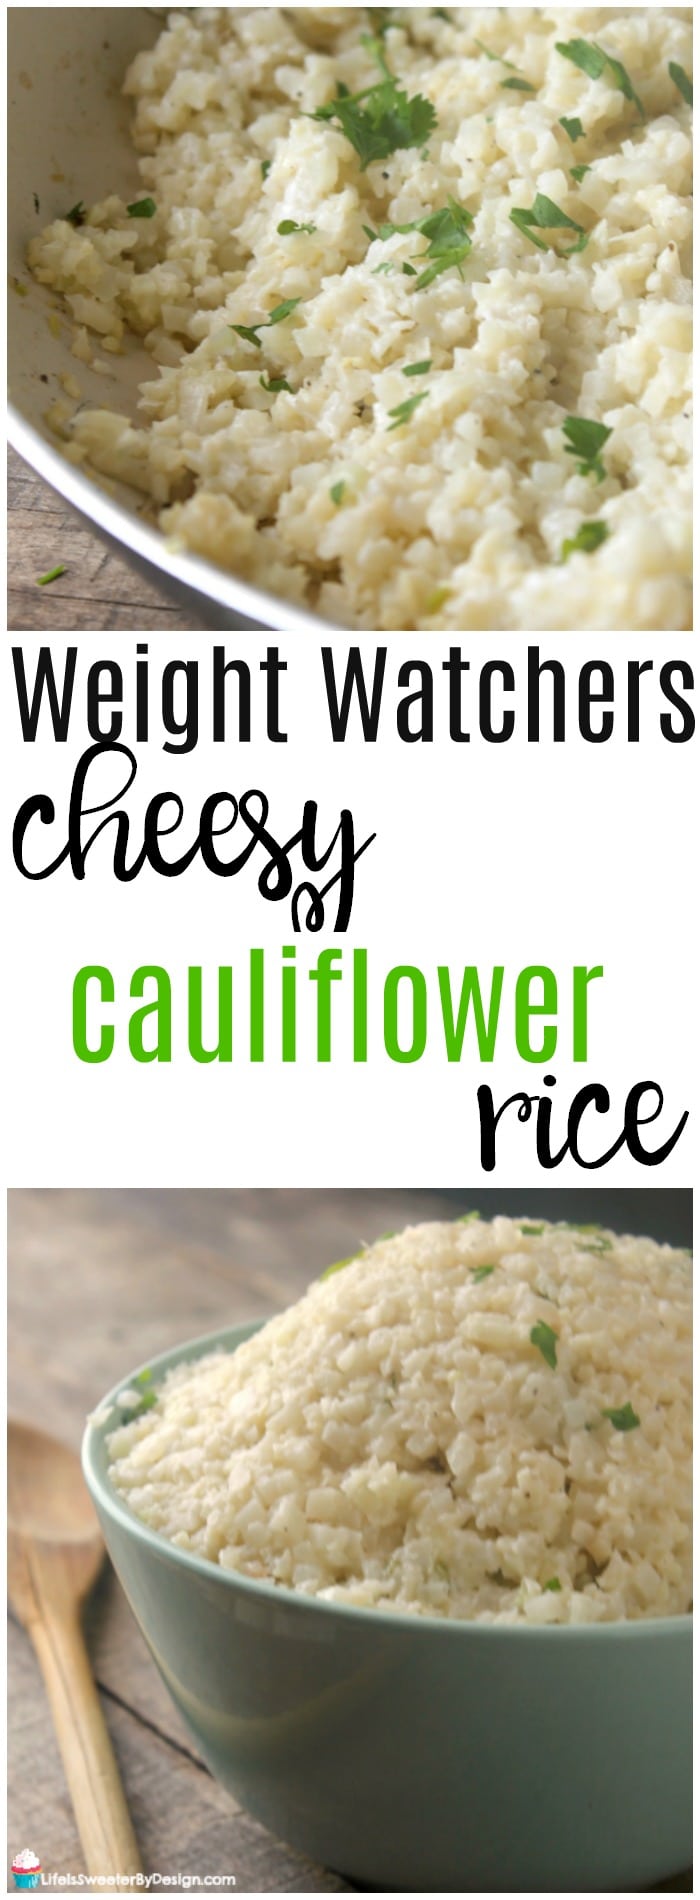 Weight Watchers Cheesy Cauliflower Rice is a great healthy side dish and perfect for holiday meals. This recipe is low in SmartPoints and delicious. It is also a great low carb recipe.